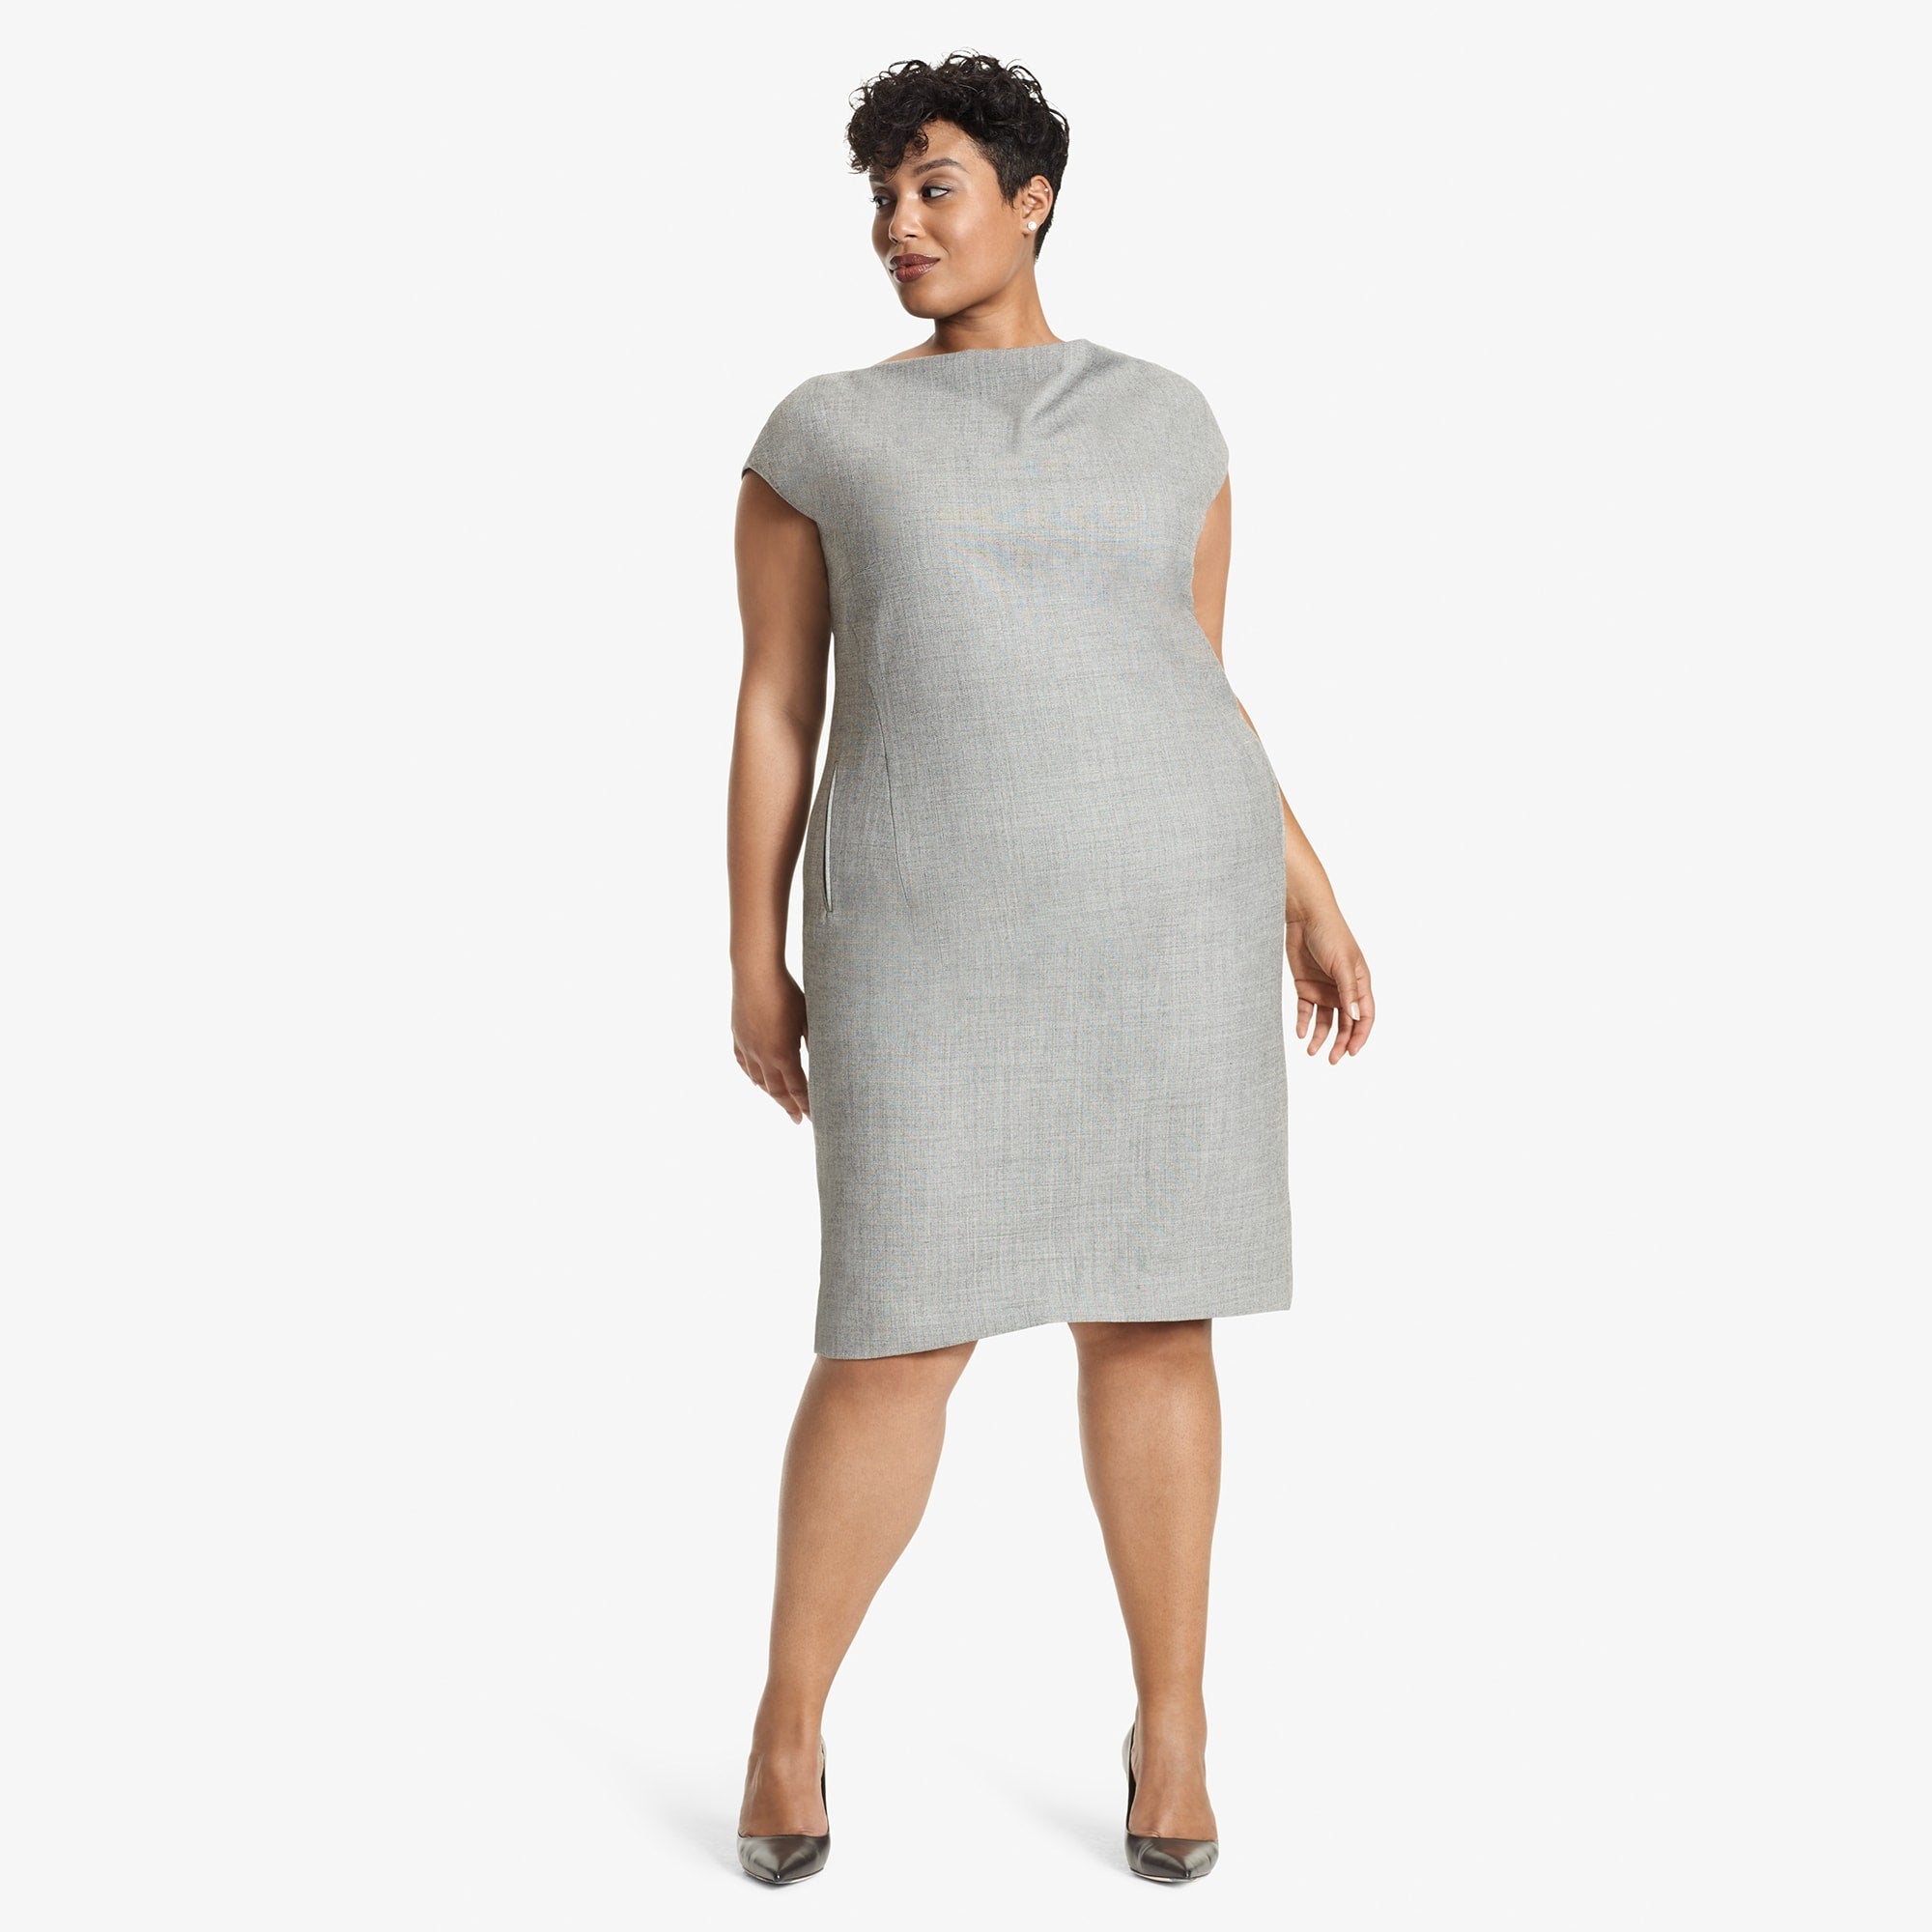 Front image of a woman standing wearing the Marilyn Dress Sharkskin in Black and White